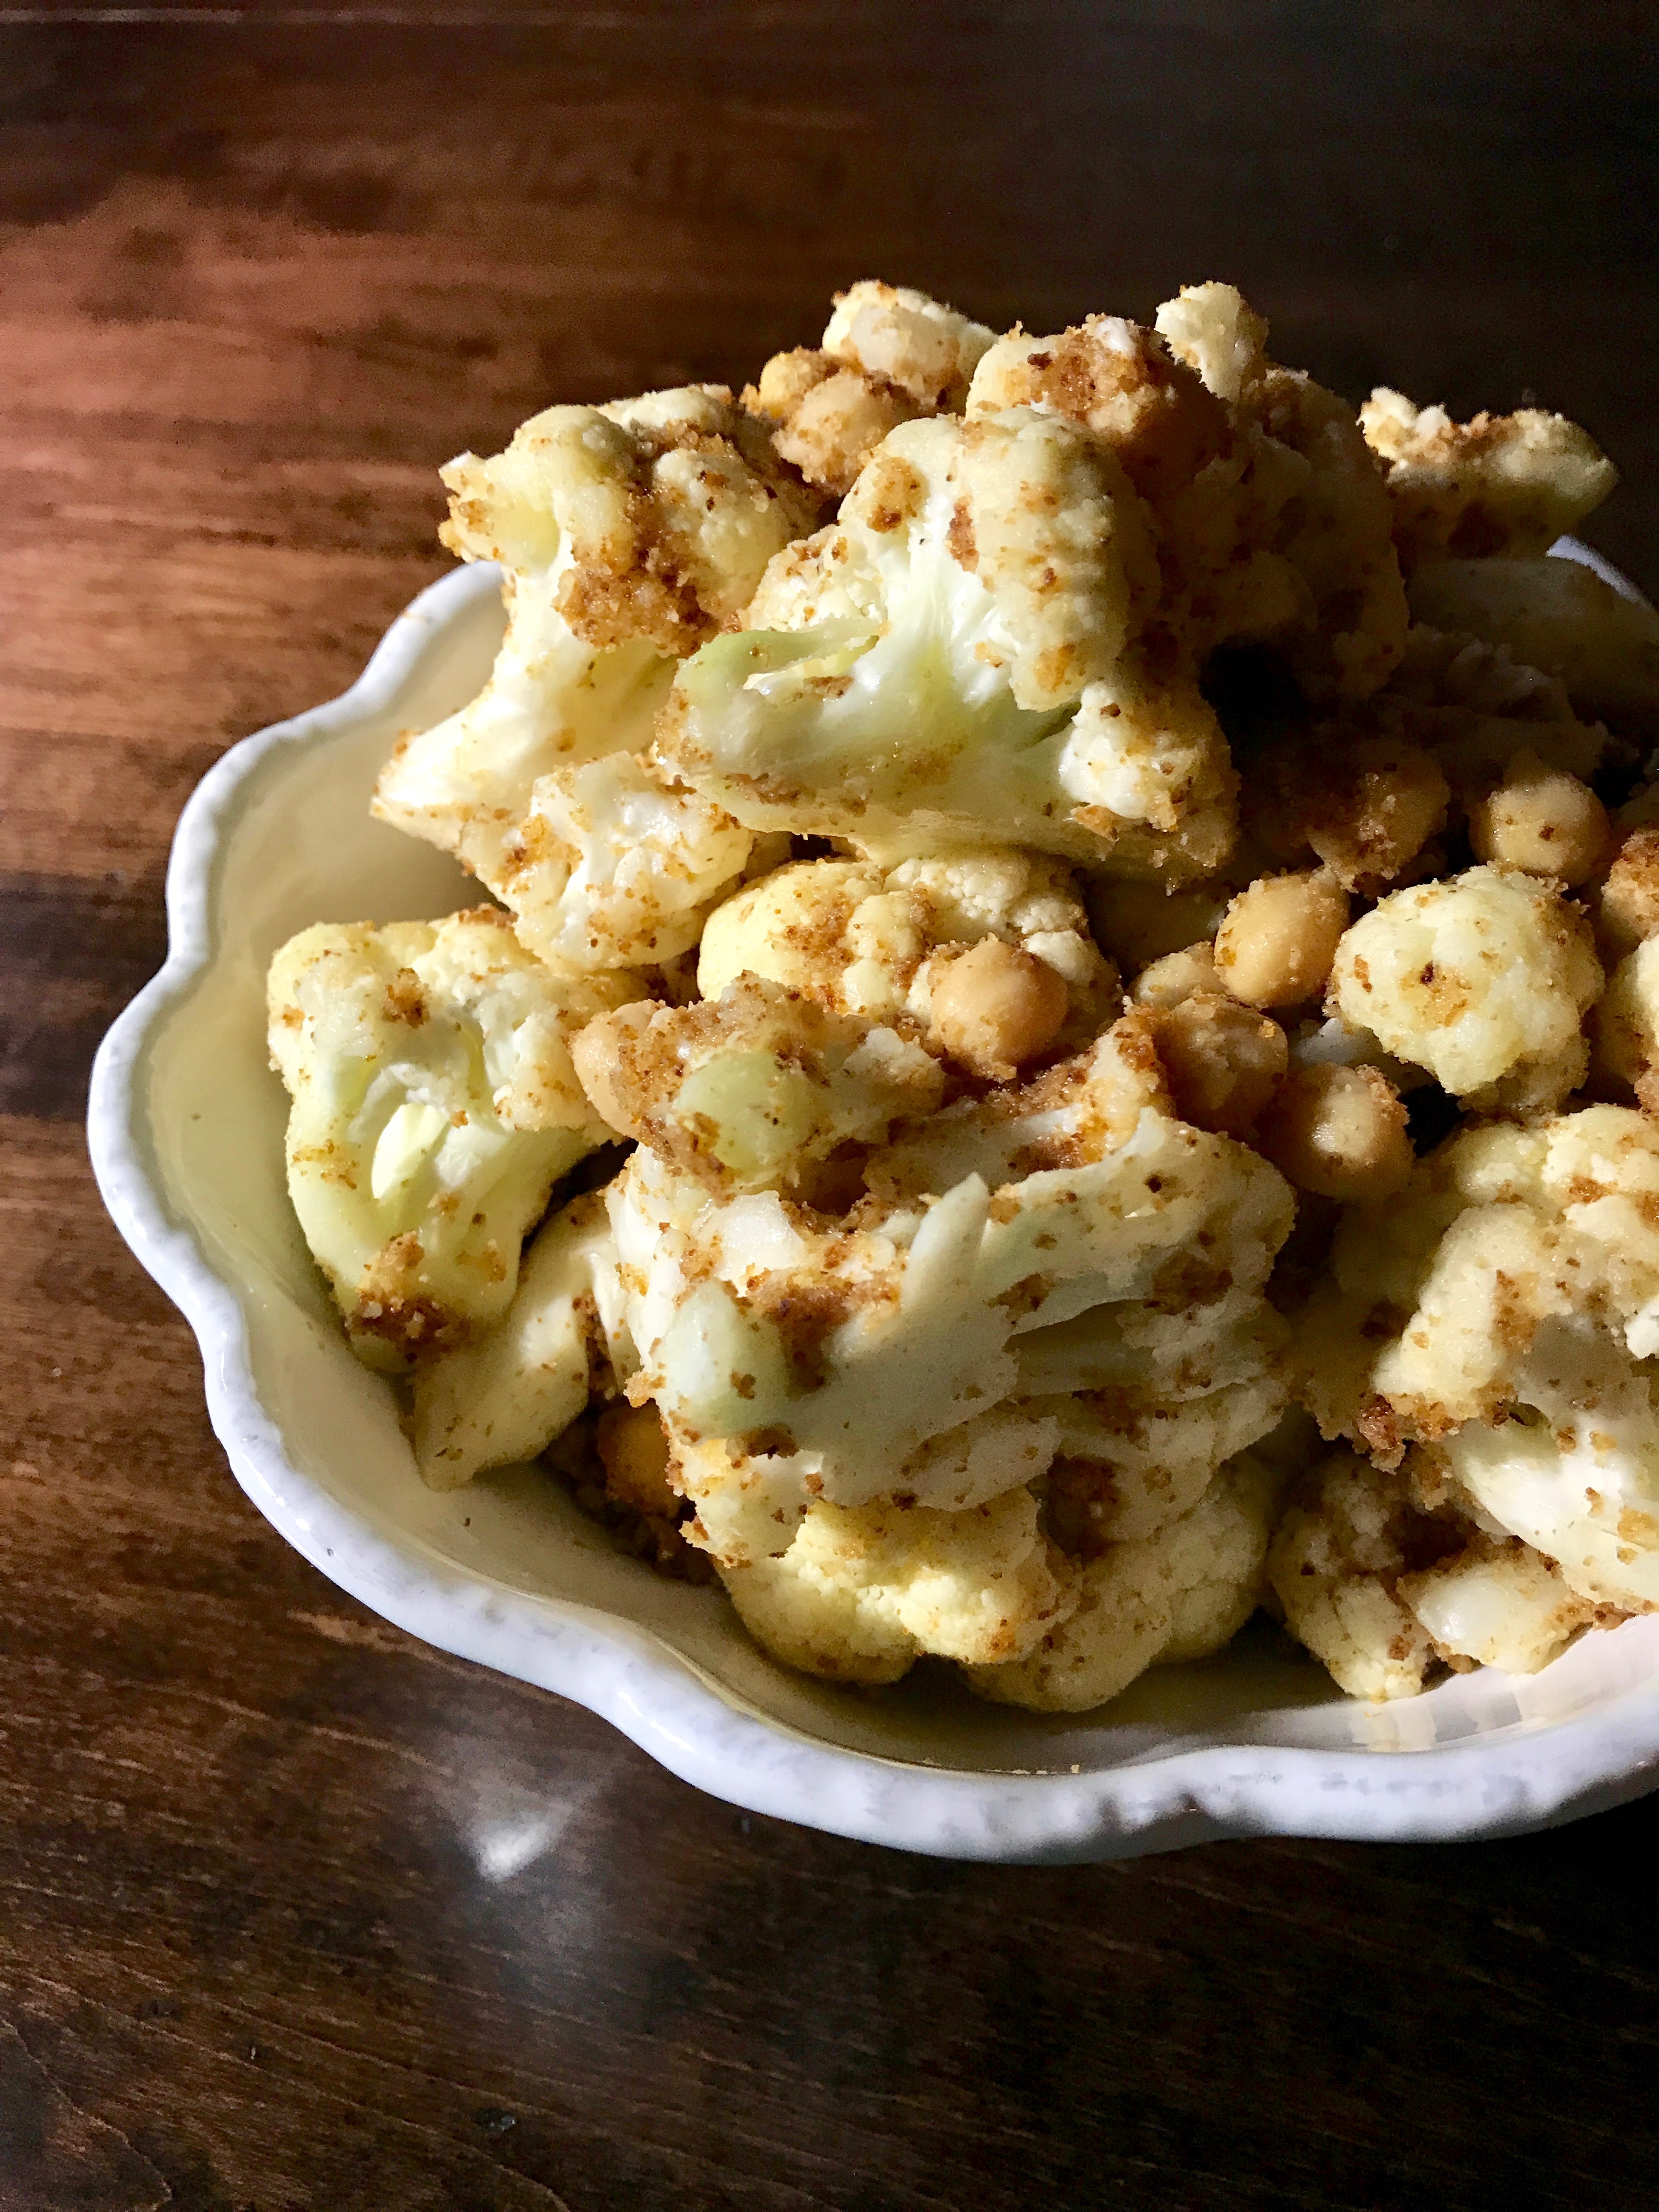 Cauliflower Chickpea Salad | An easy and addictive cauliflower dish to serve as a side or a small meal | www.thebatterthickens.com